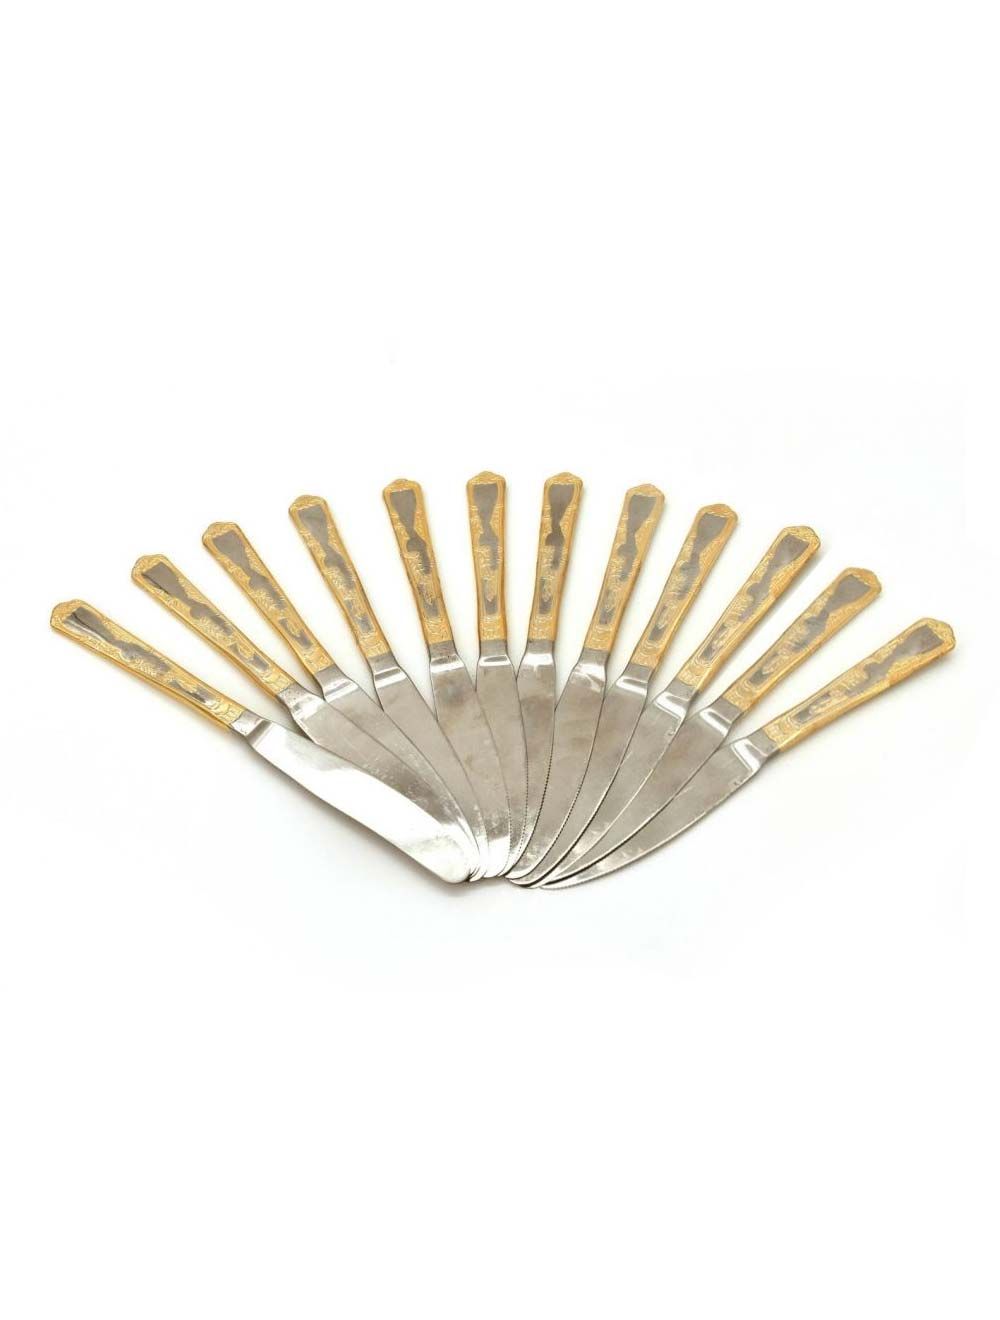 12 Pieces Gold-Plated Table Knife Set Samba